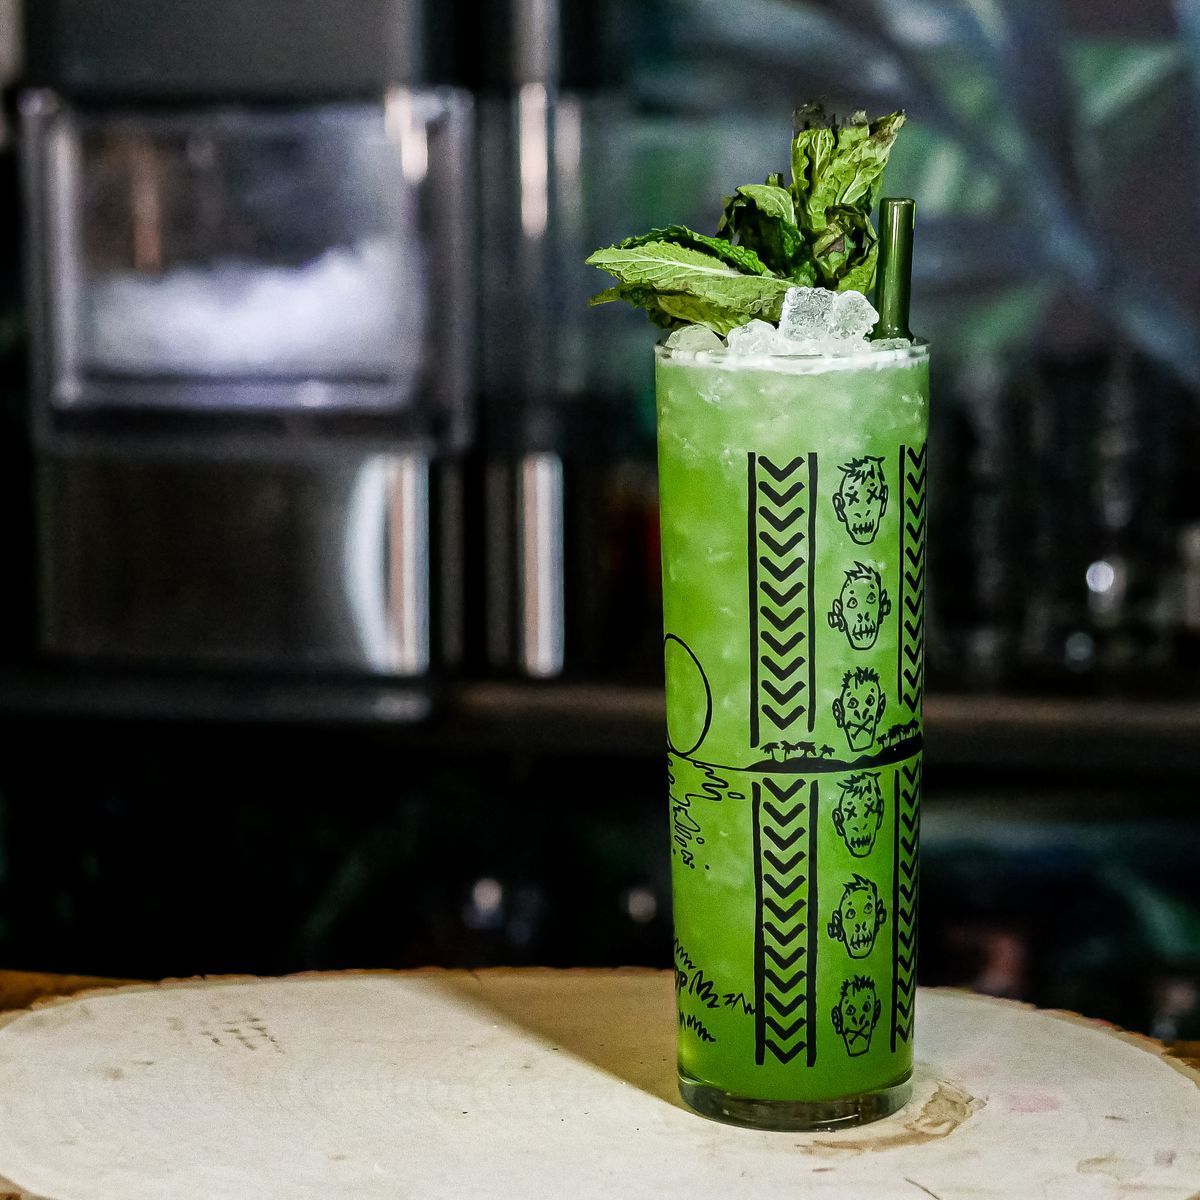 I wanted to try and create a green tiki cocktail for St. Patrick’s Day. 